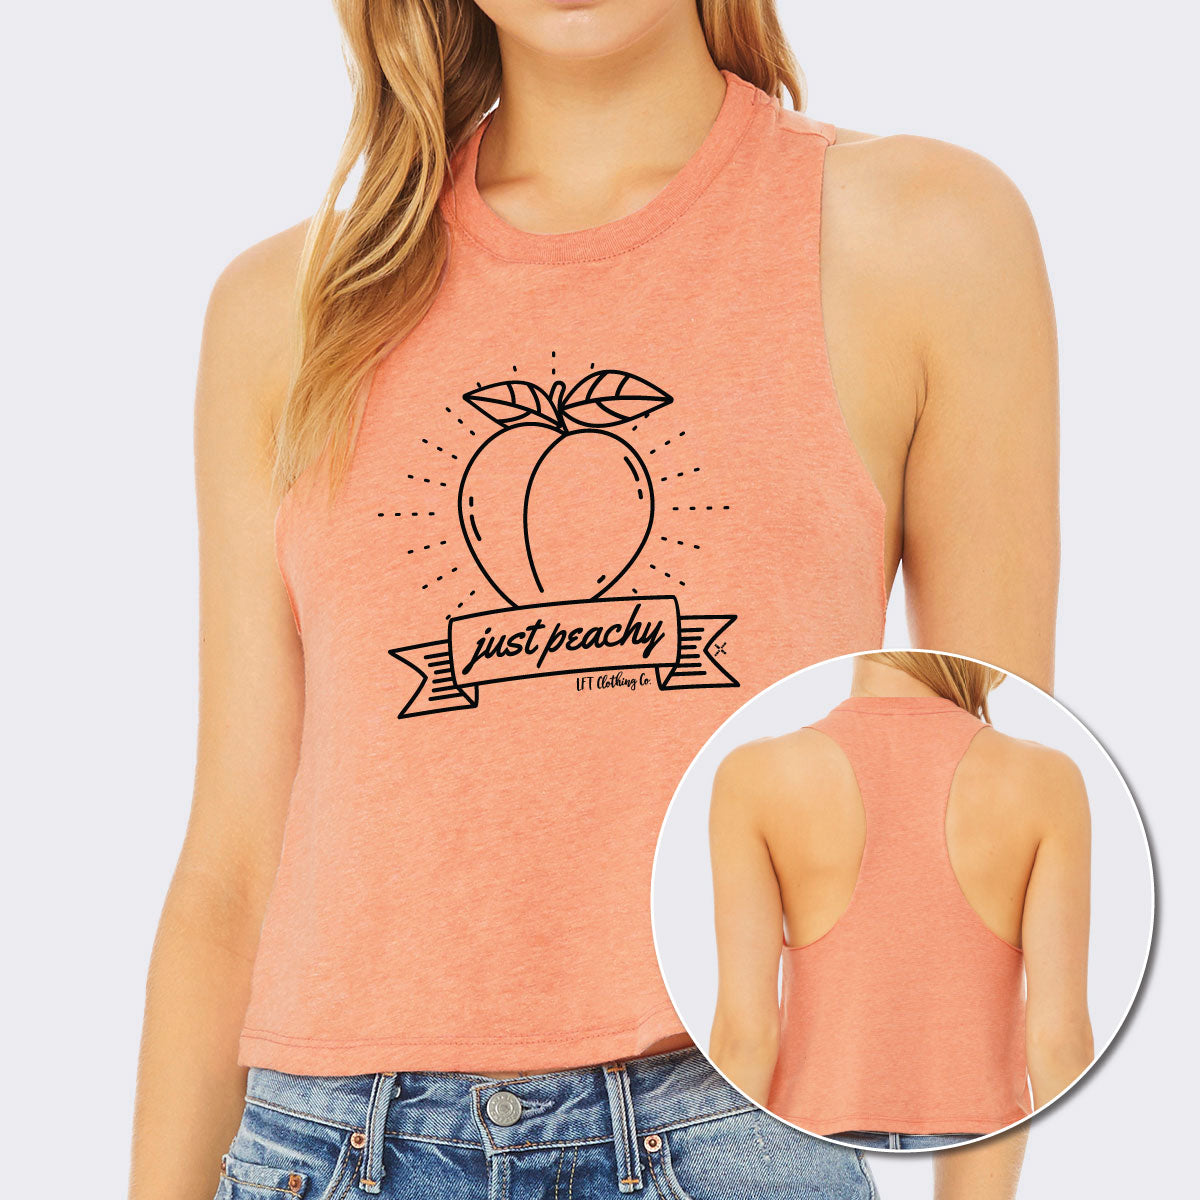 The Limit Does Not Exist Racerback Crop Tank - The LFT Clothing